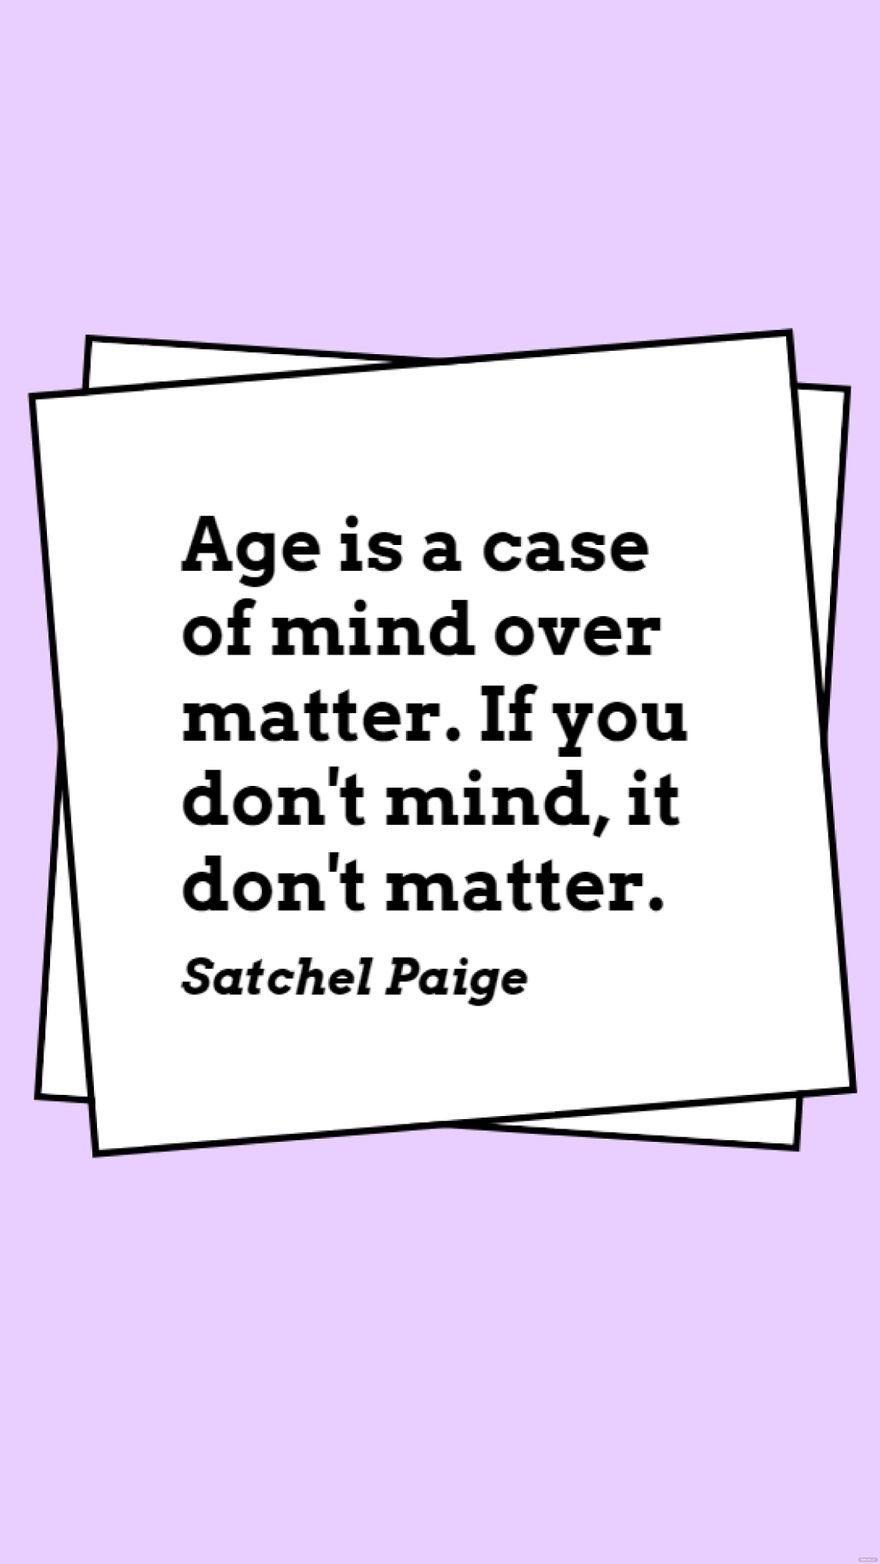 Free Satchel Paige - Age is a case of mind over matter. If you don't mind, it don't matter. in JPG